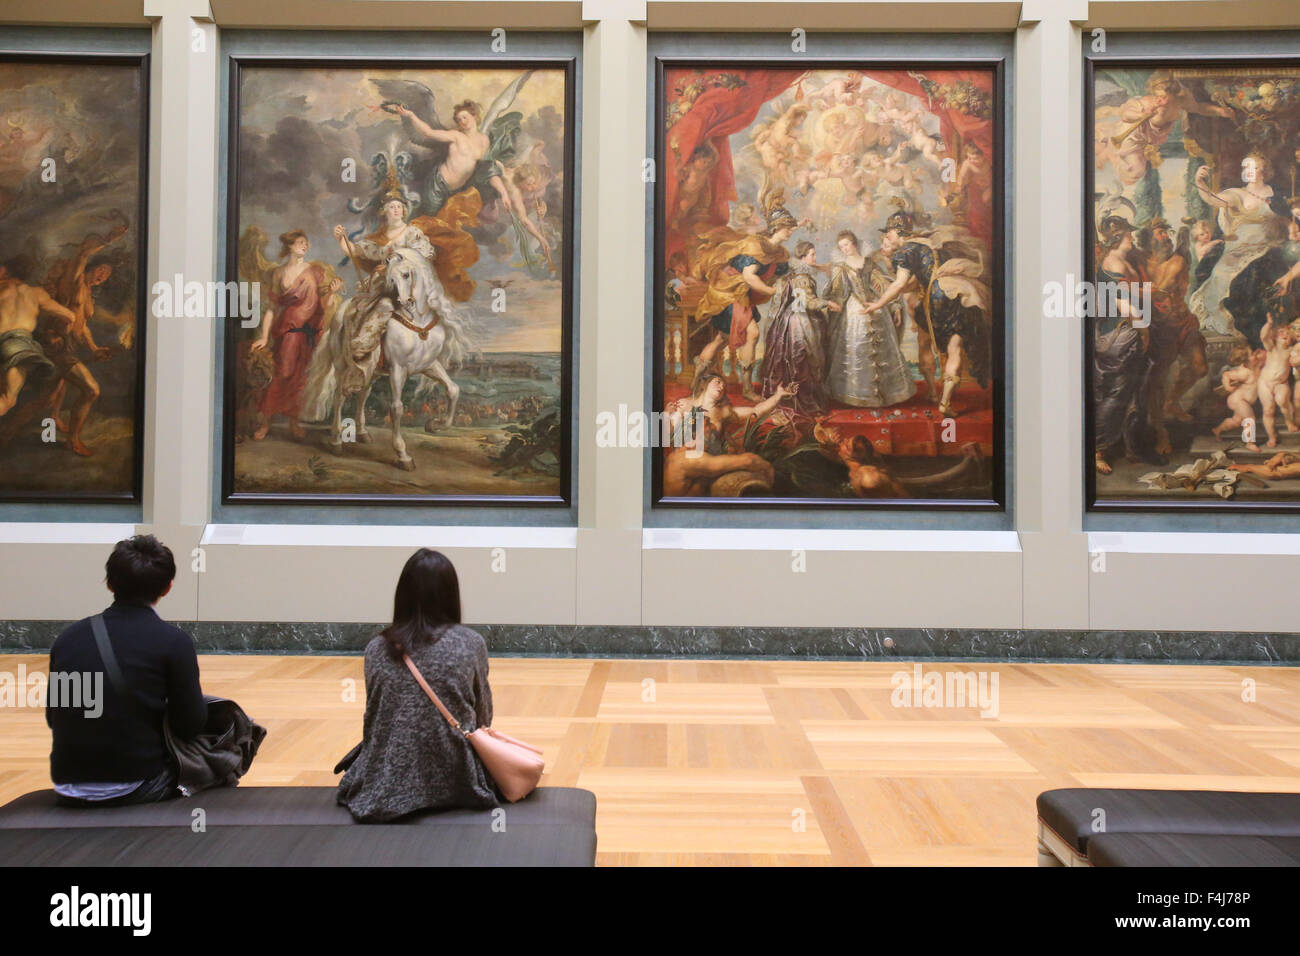 Visitors in the Medicis Gallery, The Louvre Museum, Paris, France, Euruope Stock Photo